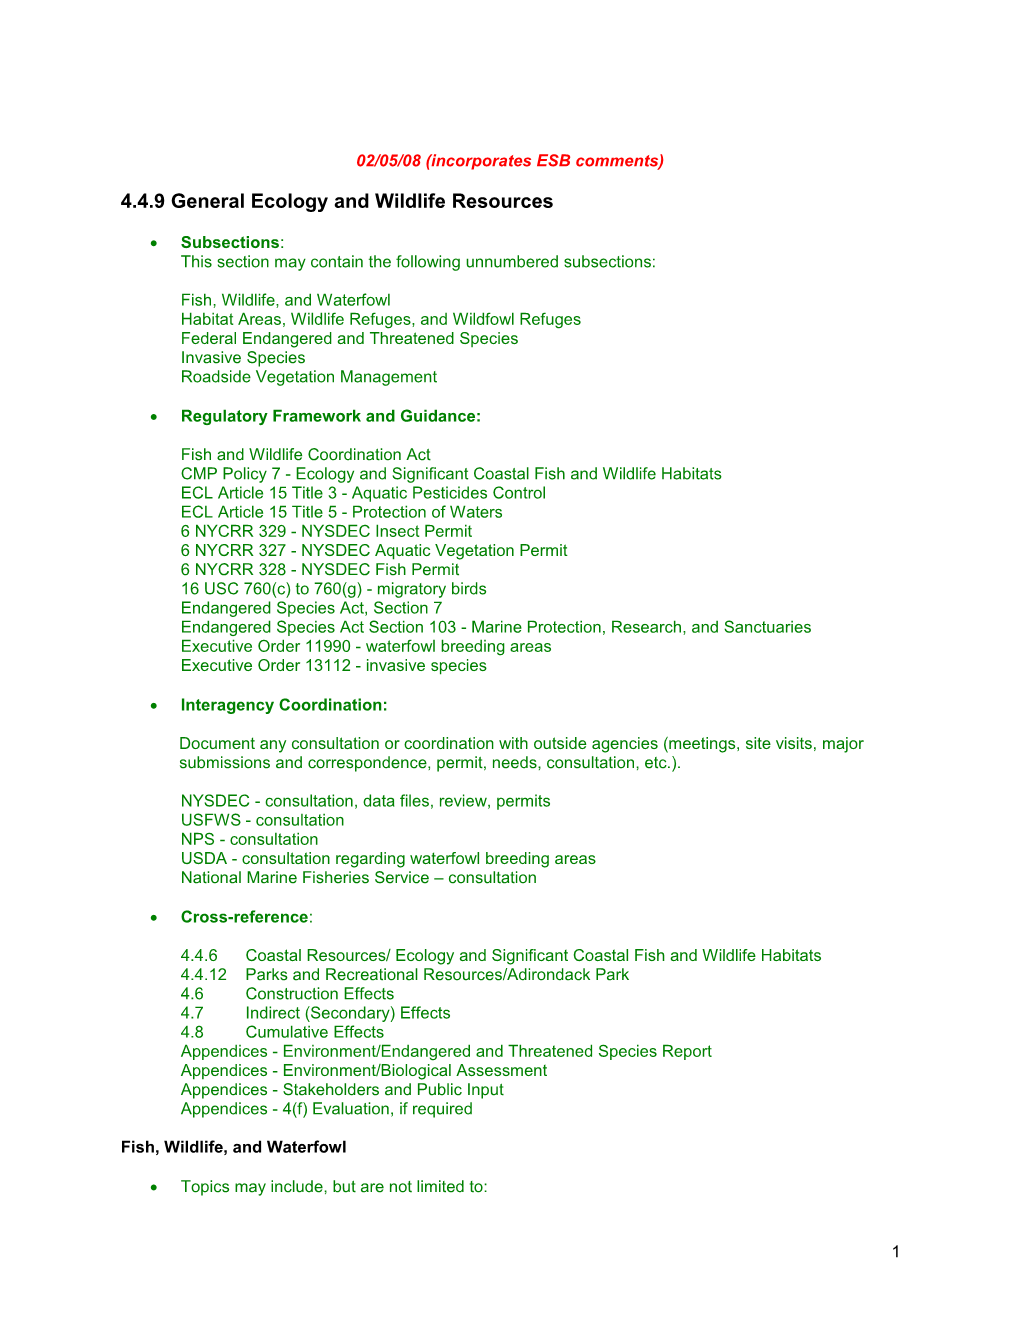 4.4.9General Ecology and Wildlife Resources